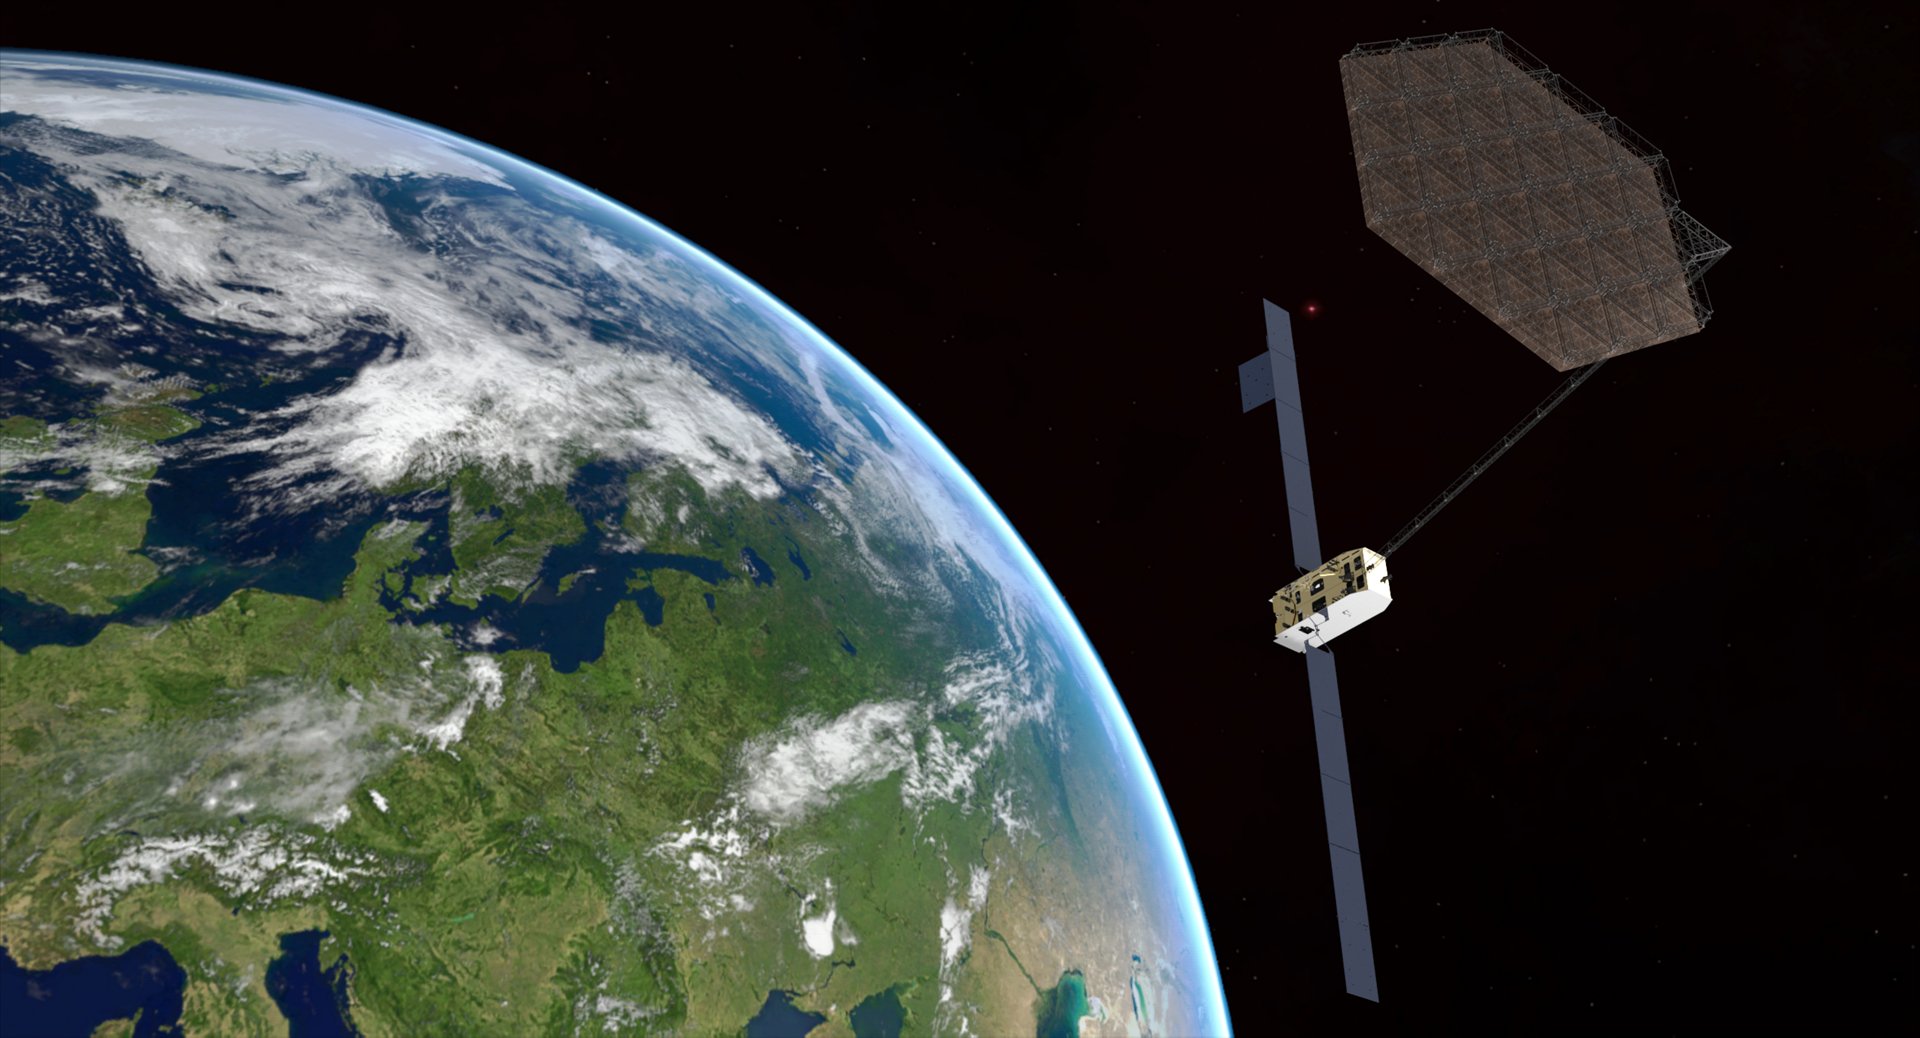 Airbus and European Commission enter research deal for space manufacturing